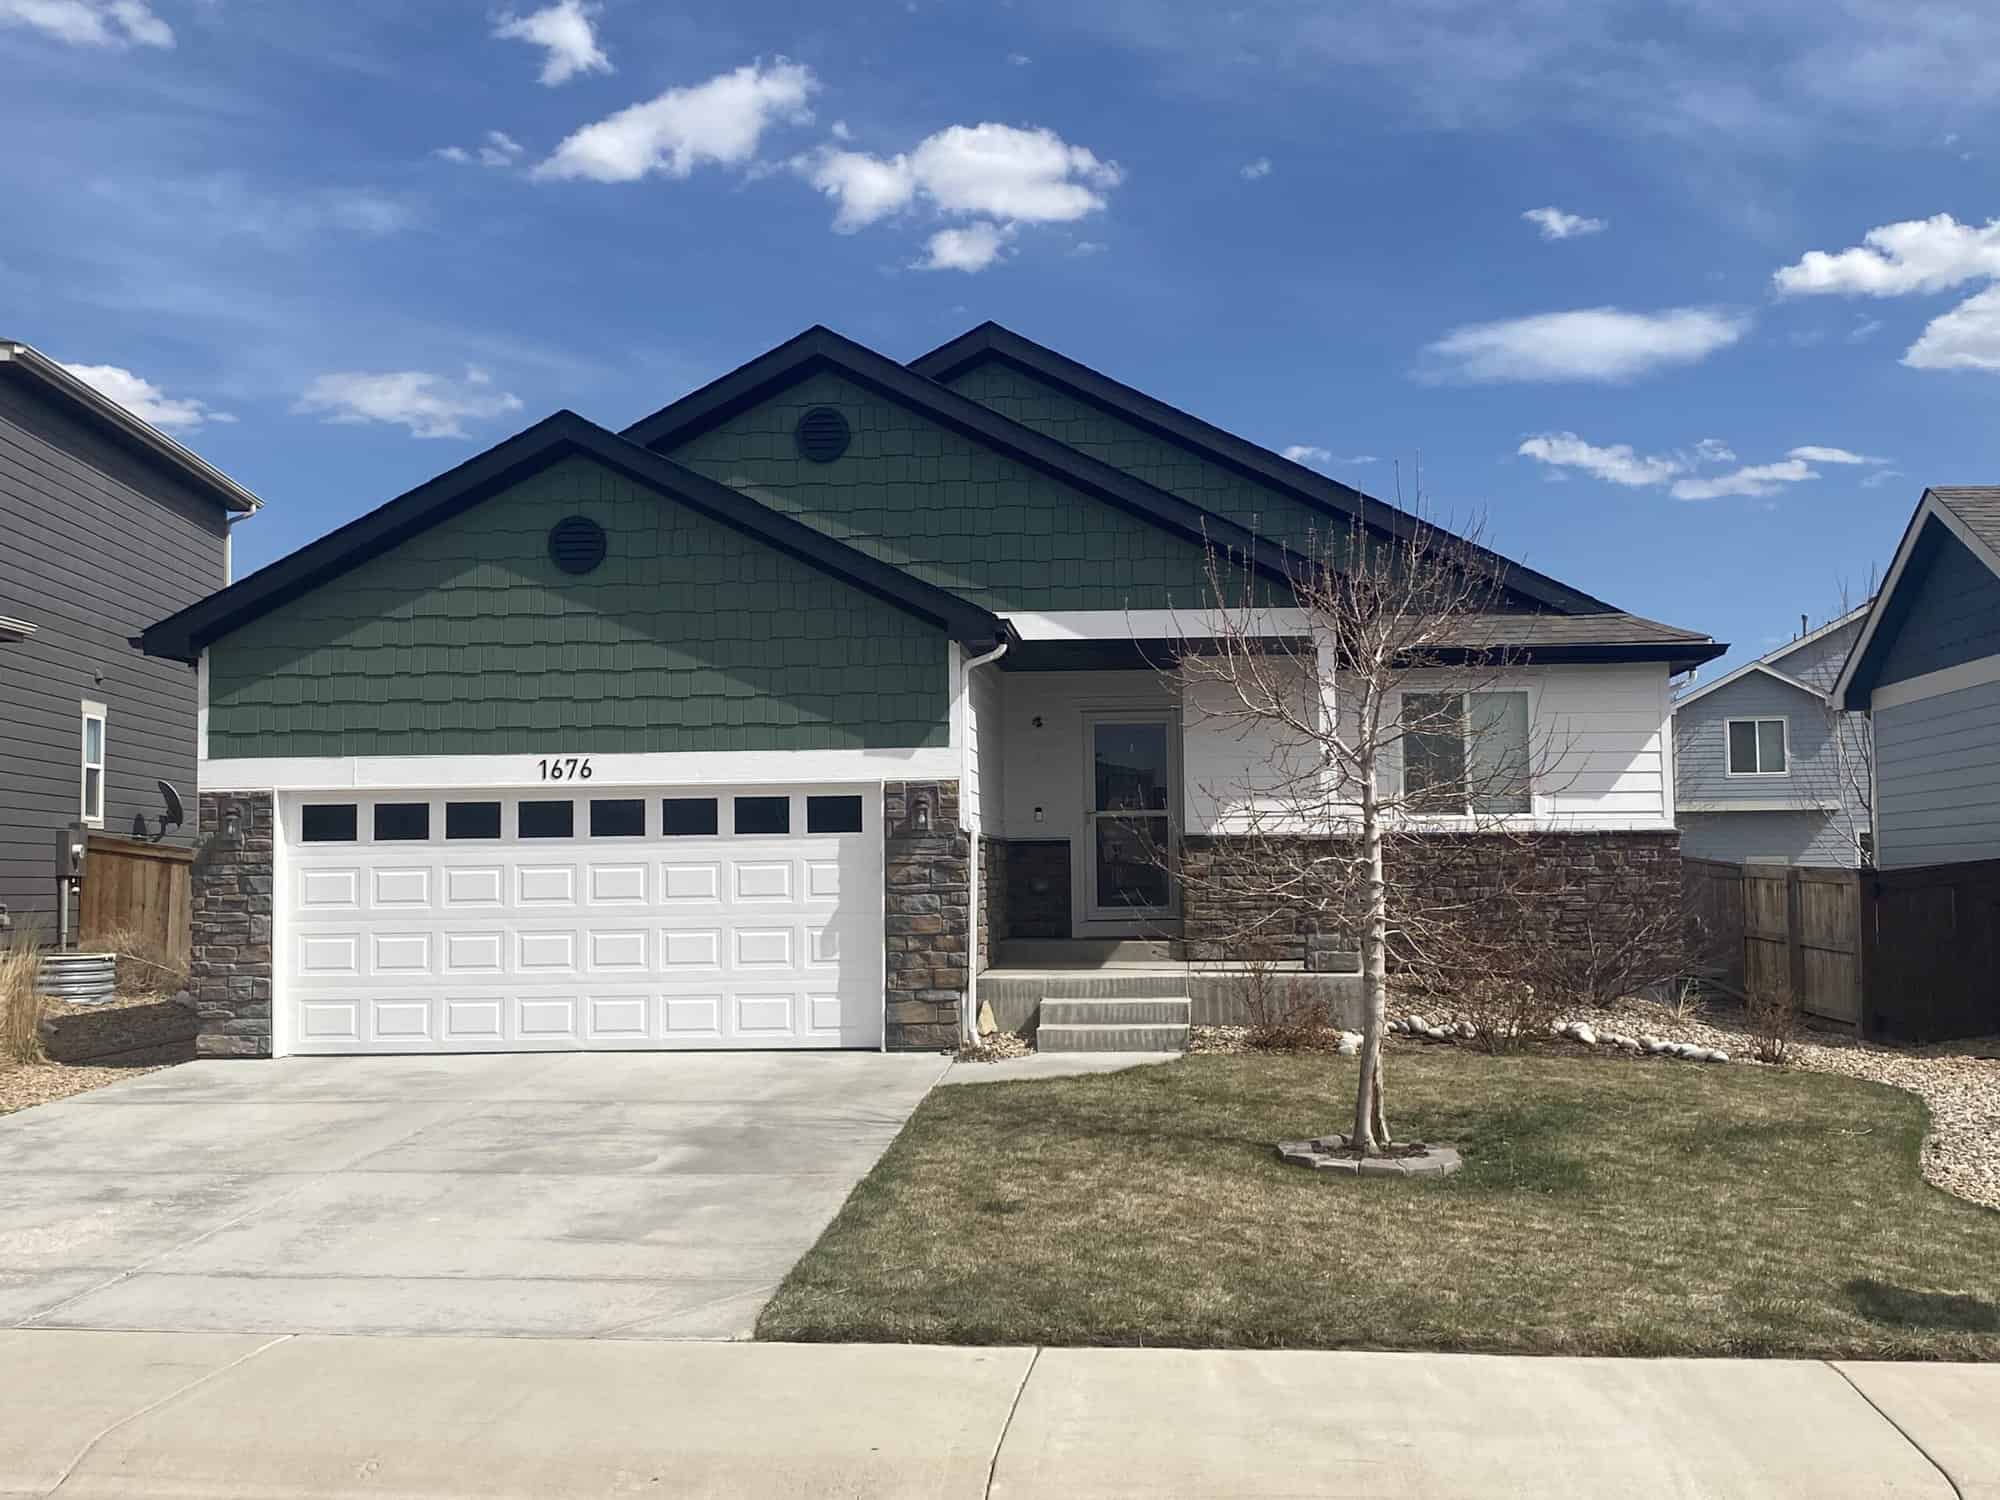 Newly Painted House Exterior with Garage, Lawn and Driveway- painting services in Arvada, CO